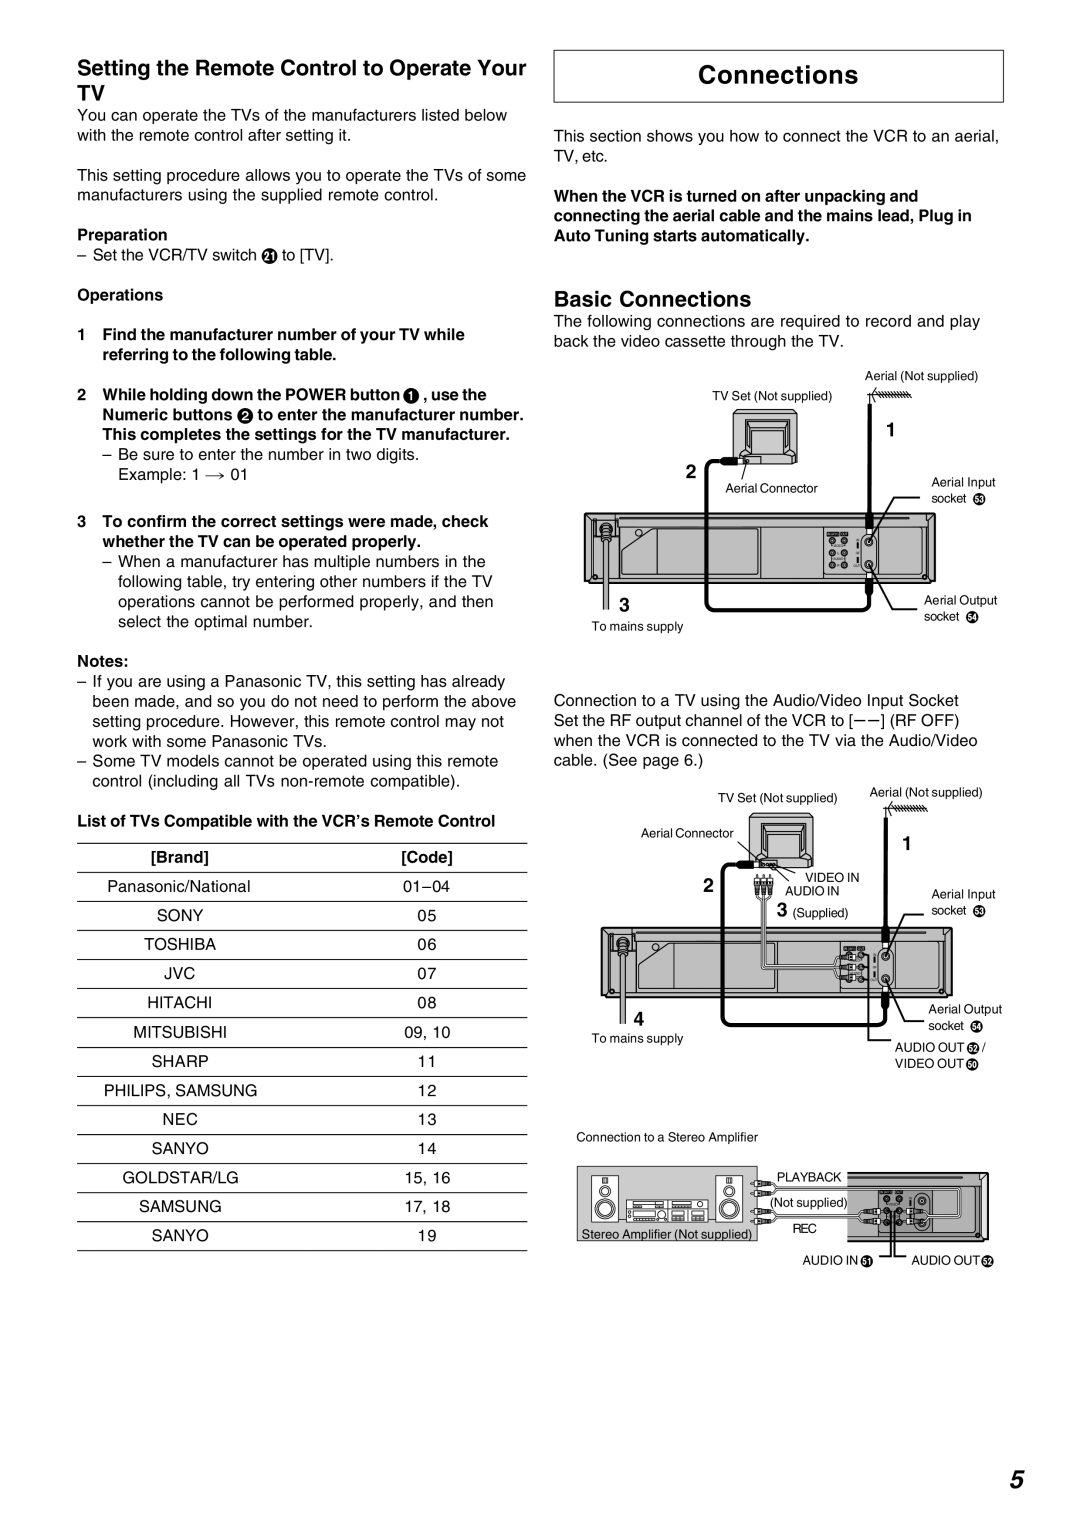 Panasonic NV-FJ620, NV-FJ625AM specifications Setting the Remote Control to Operate Your TV, Basic Connections 